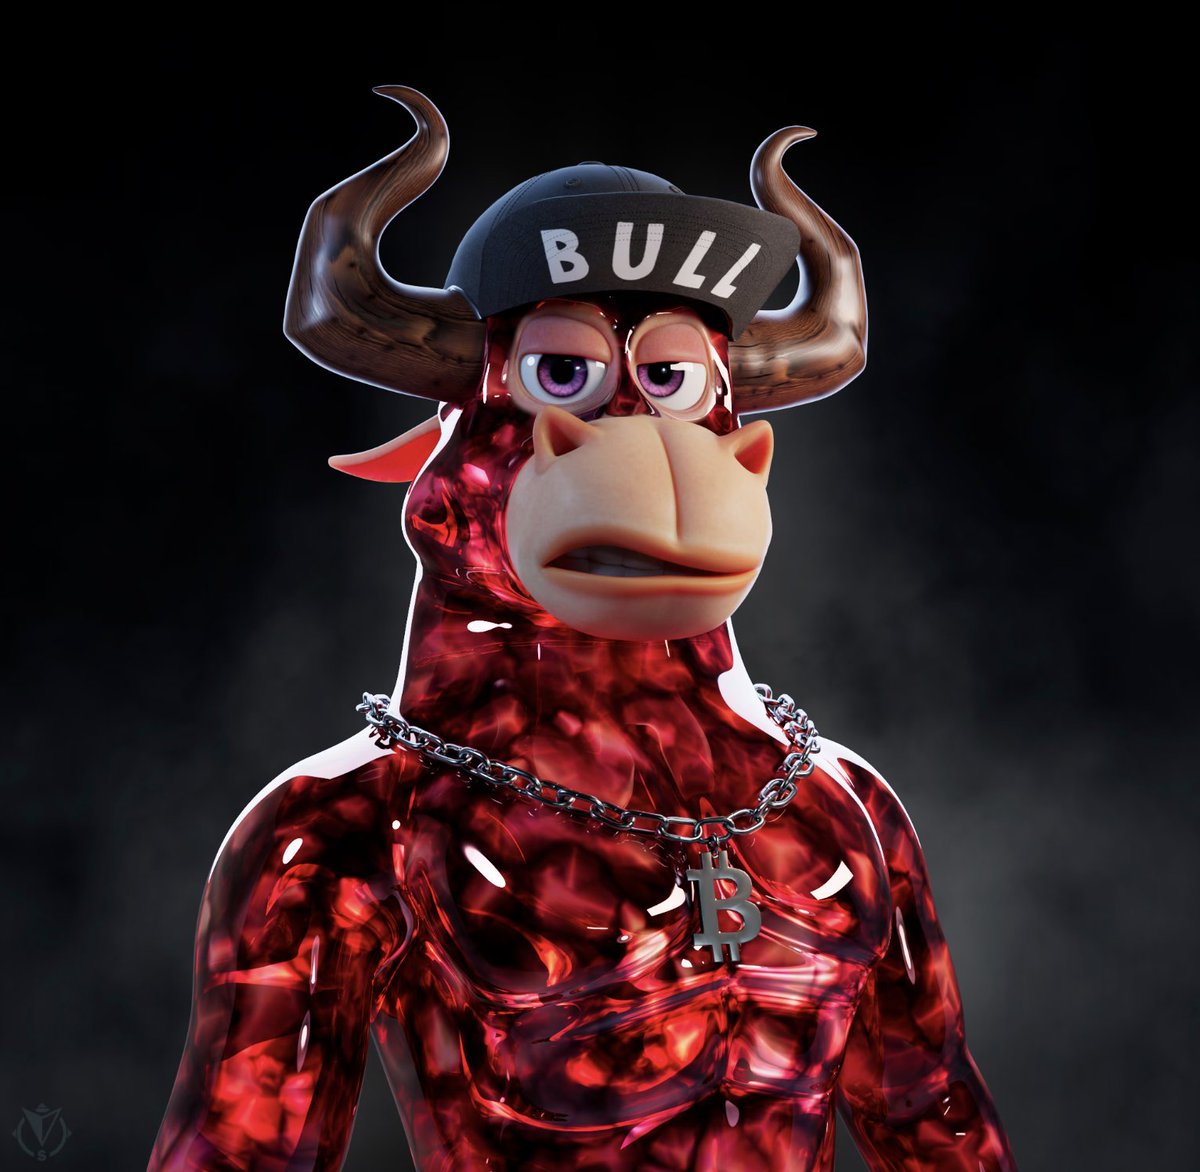 #NewProfilePic 
I just love this one too much - couldn't resist making him my PFP!
@BullsApesProj 
#Bullsto1Eth